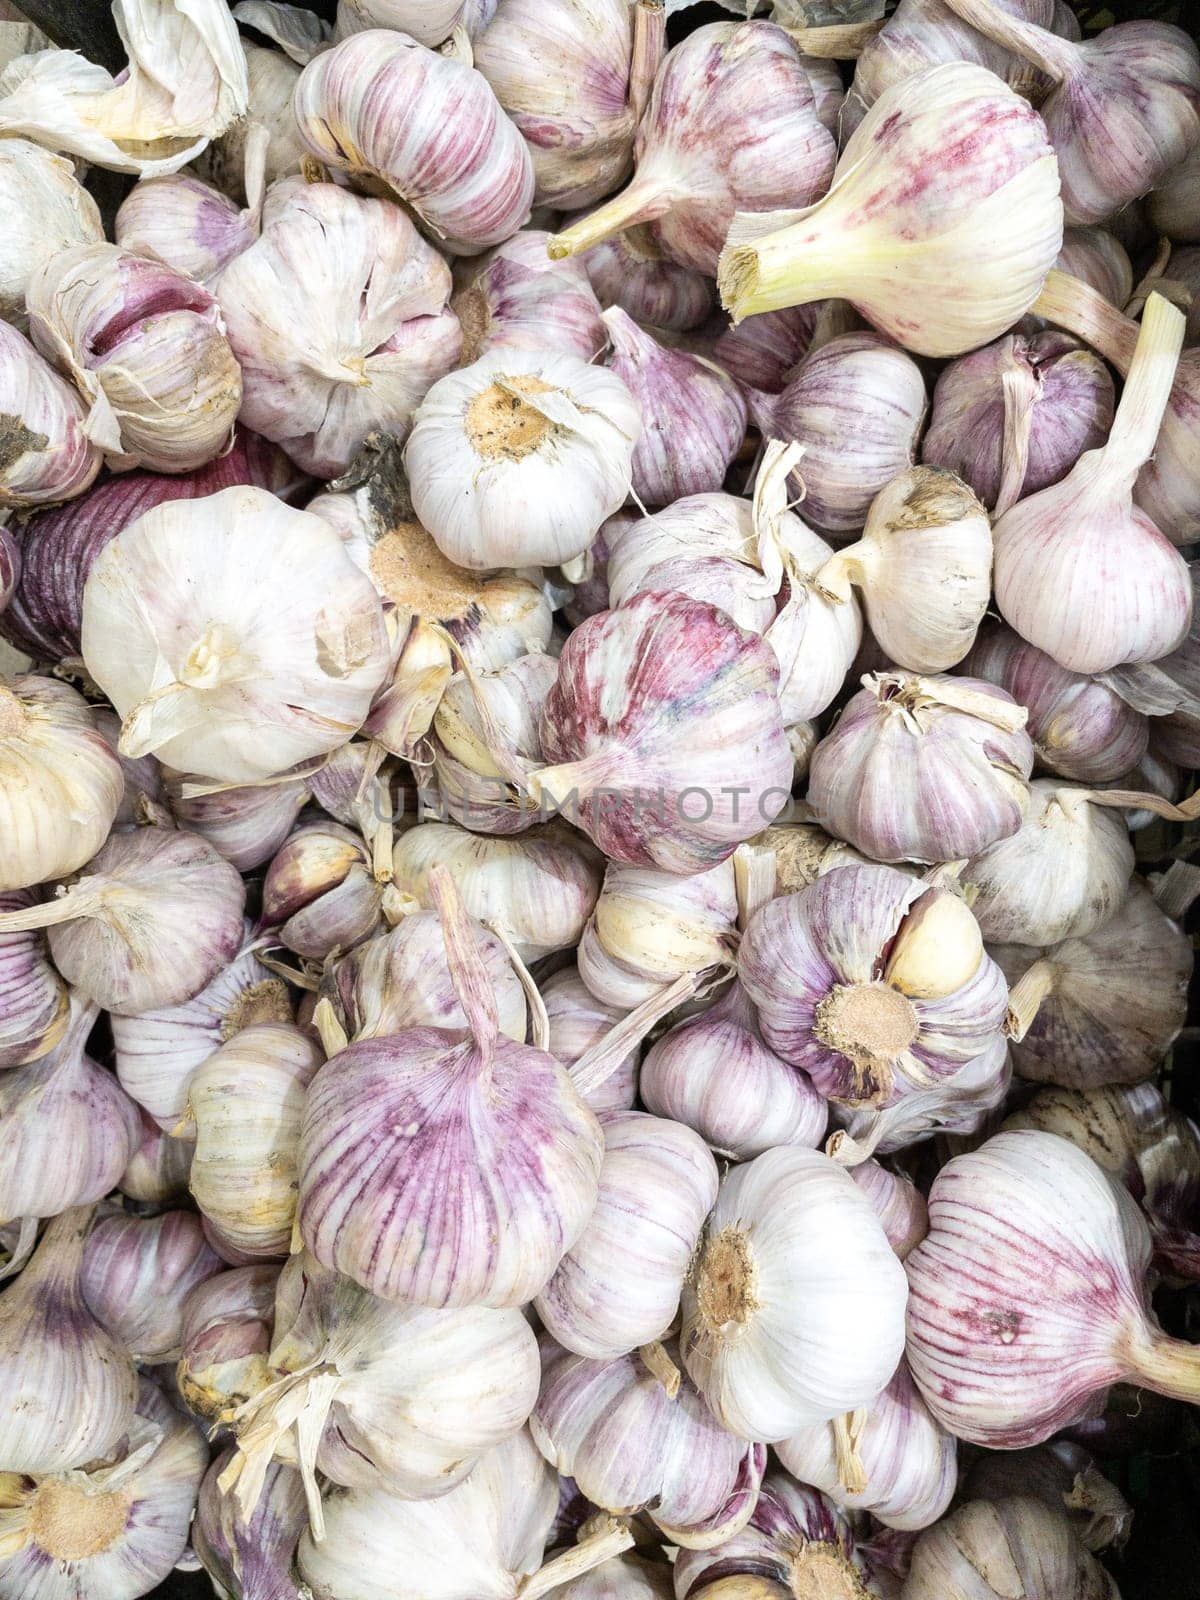 Garlic on the counter of a grocery hypermarket, sale of fresh vegetables. Vertical photo by darksoul72